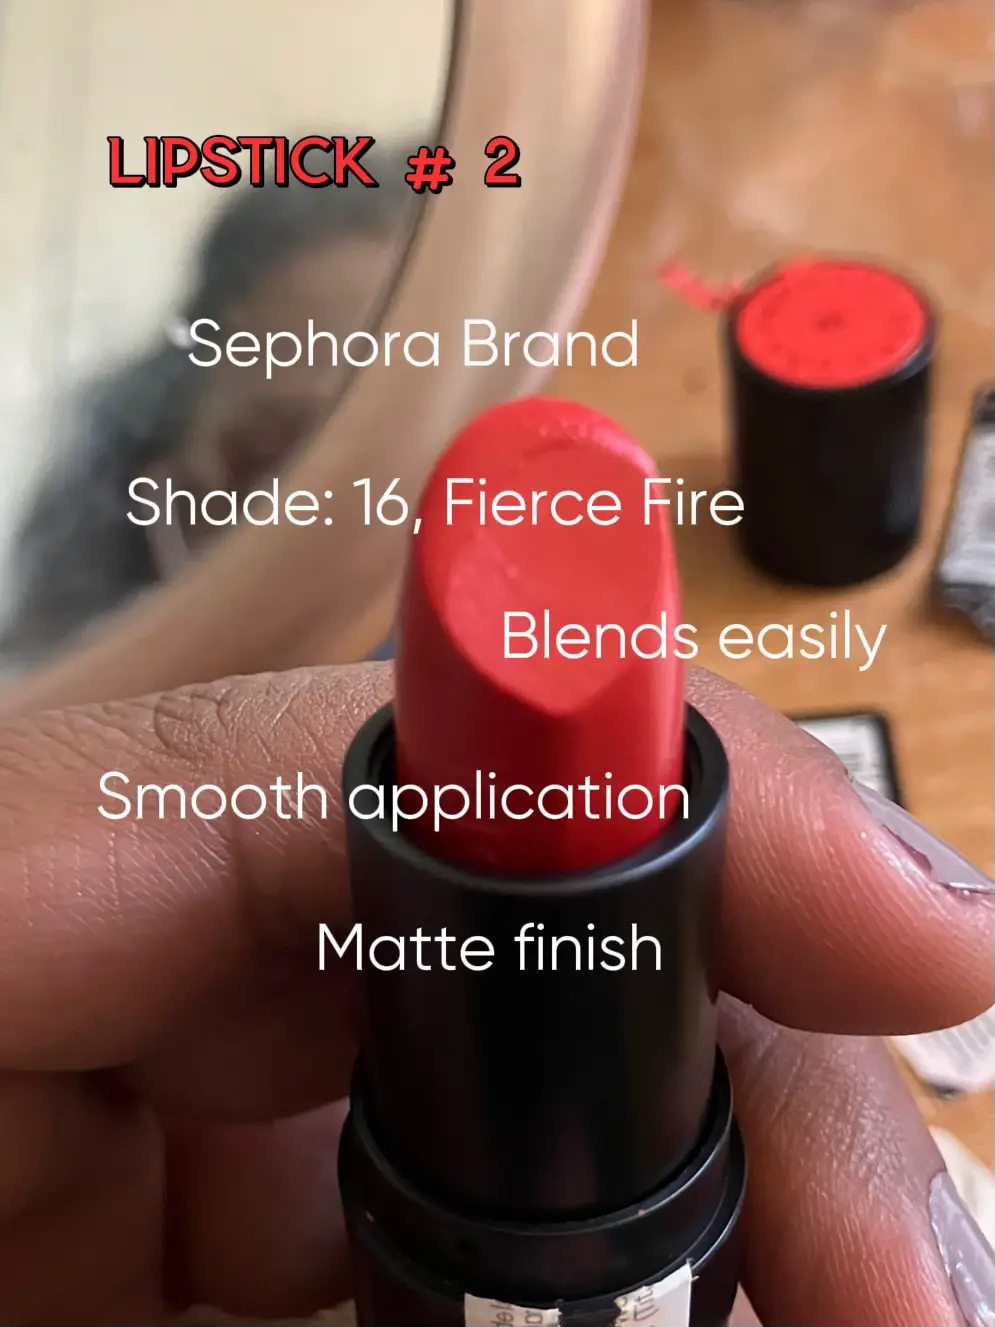 Sephora collection soft matte and easy lipstick shade # 6 “ whats